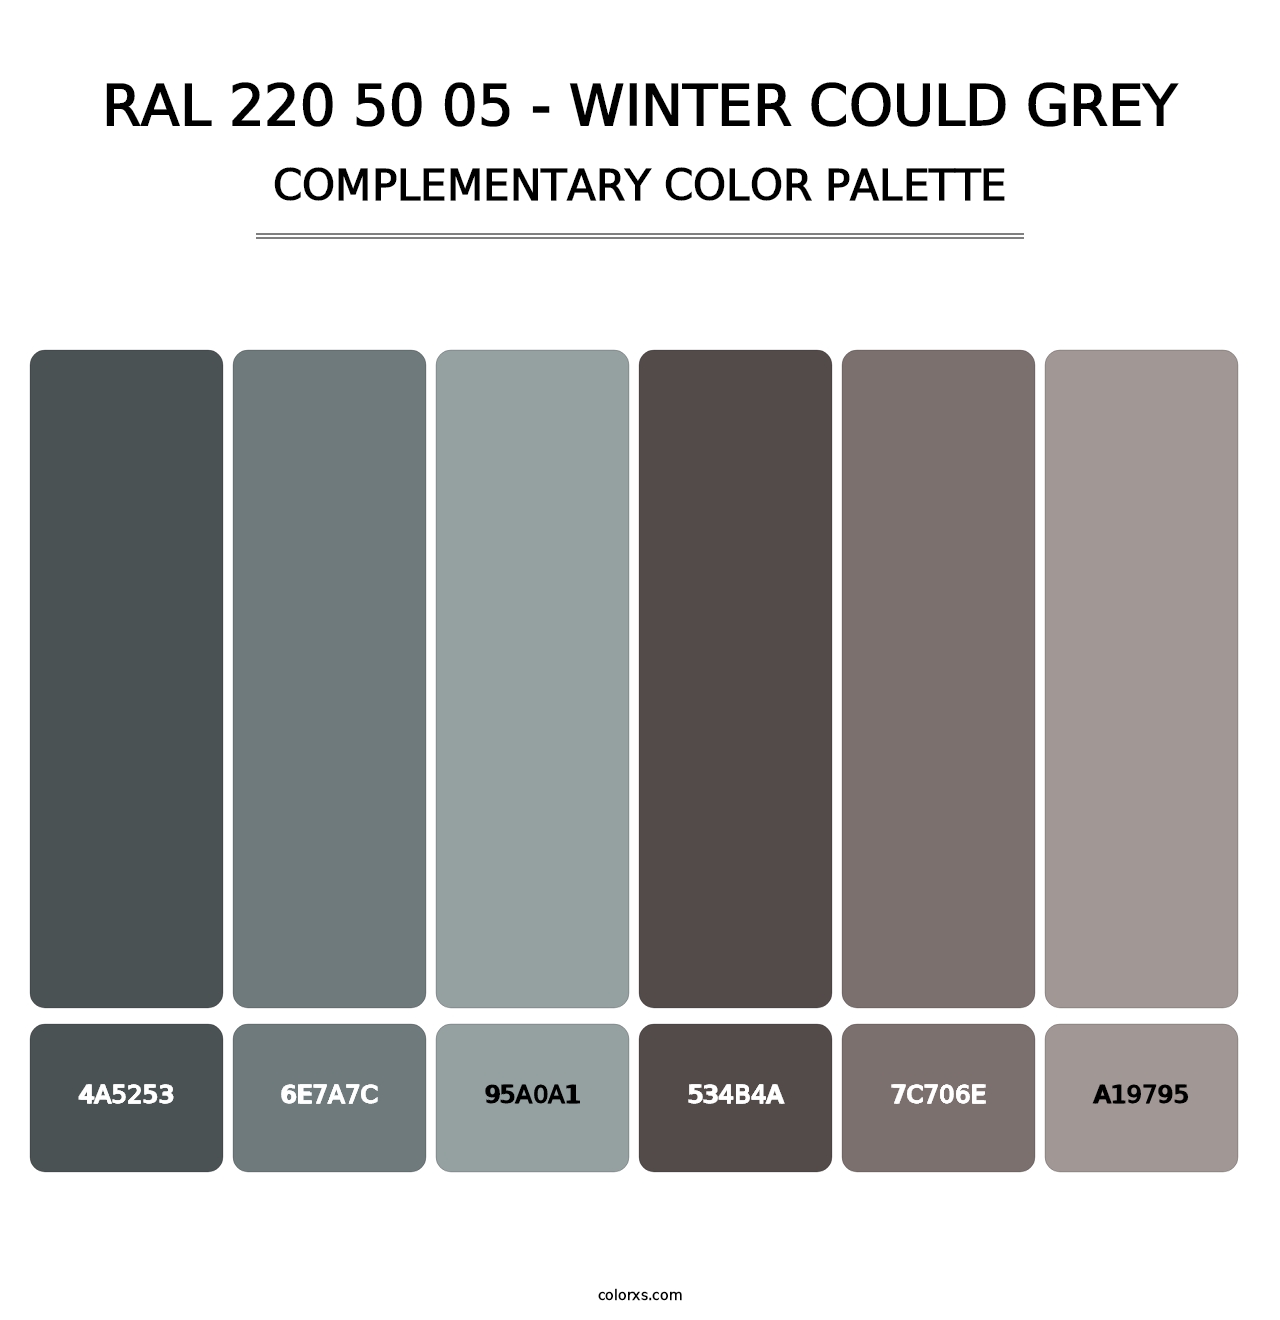 RAL 220 50 05 - Winter Could Grey - Complementary Color Palette